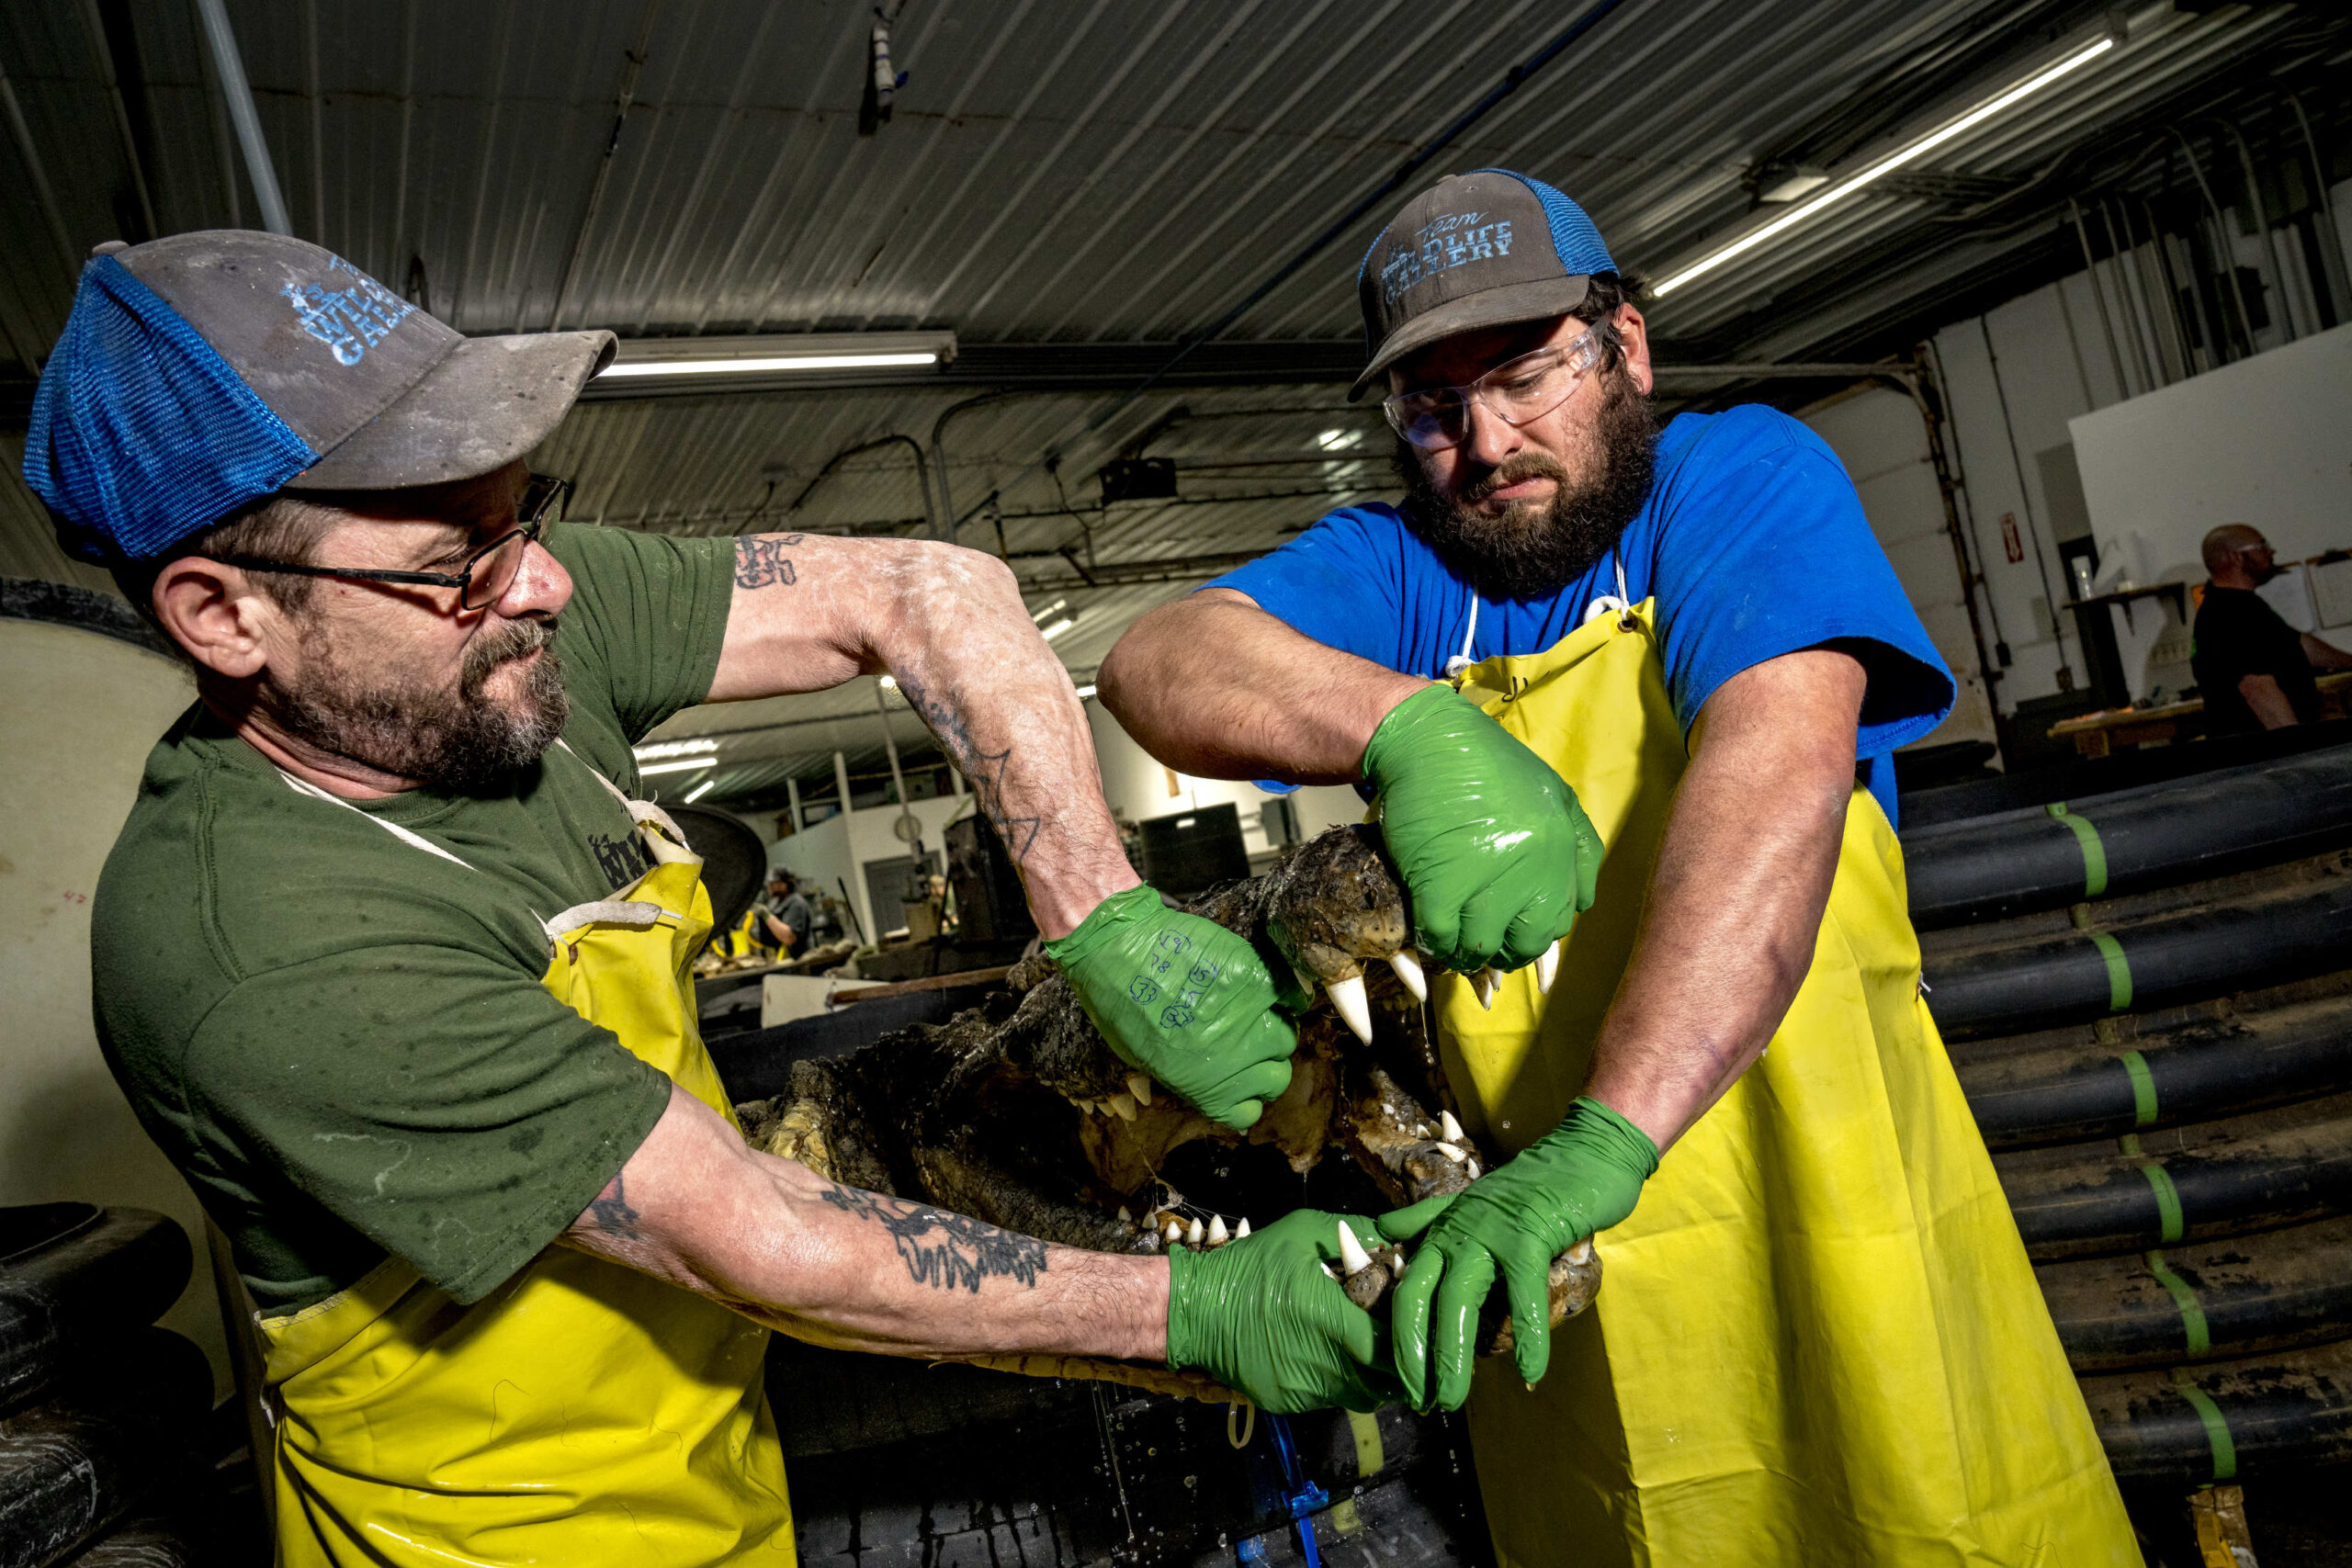 Two tannery employees pull a crocodile from a tanning solution.